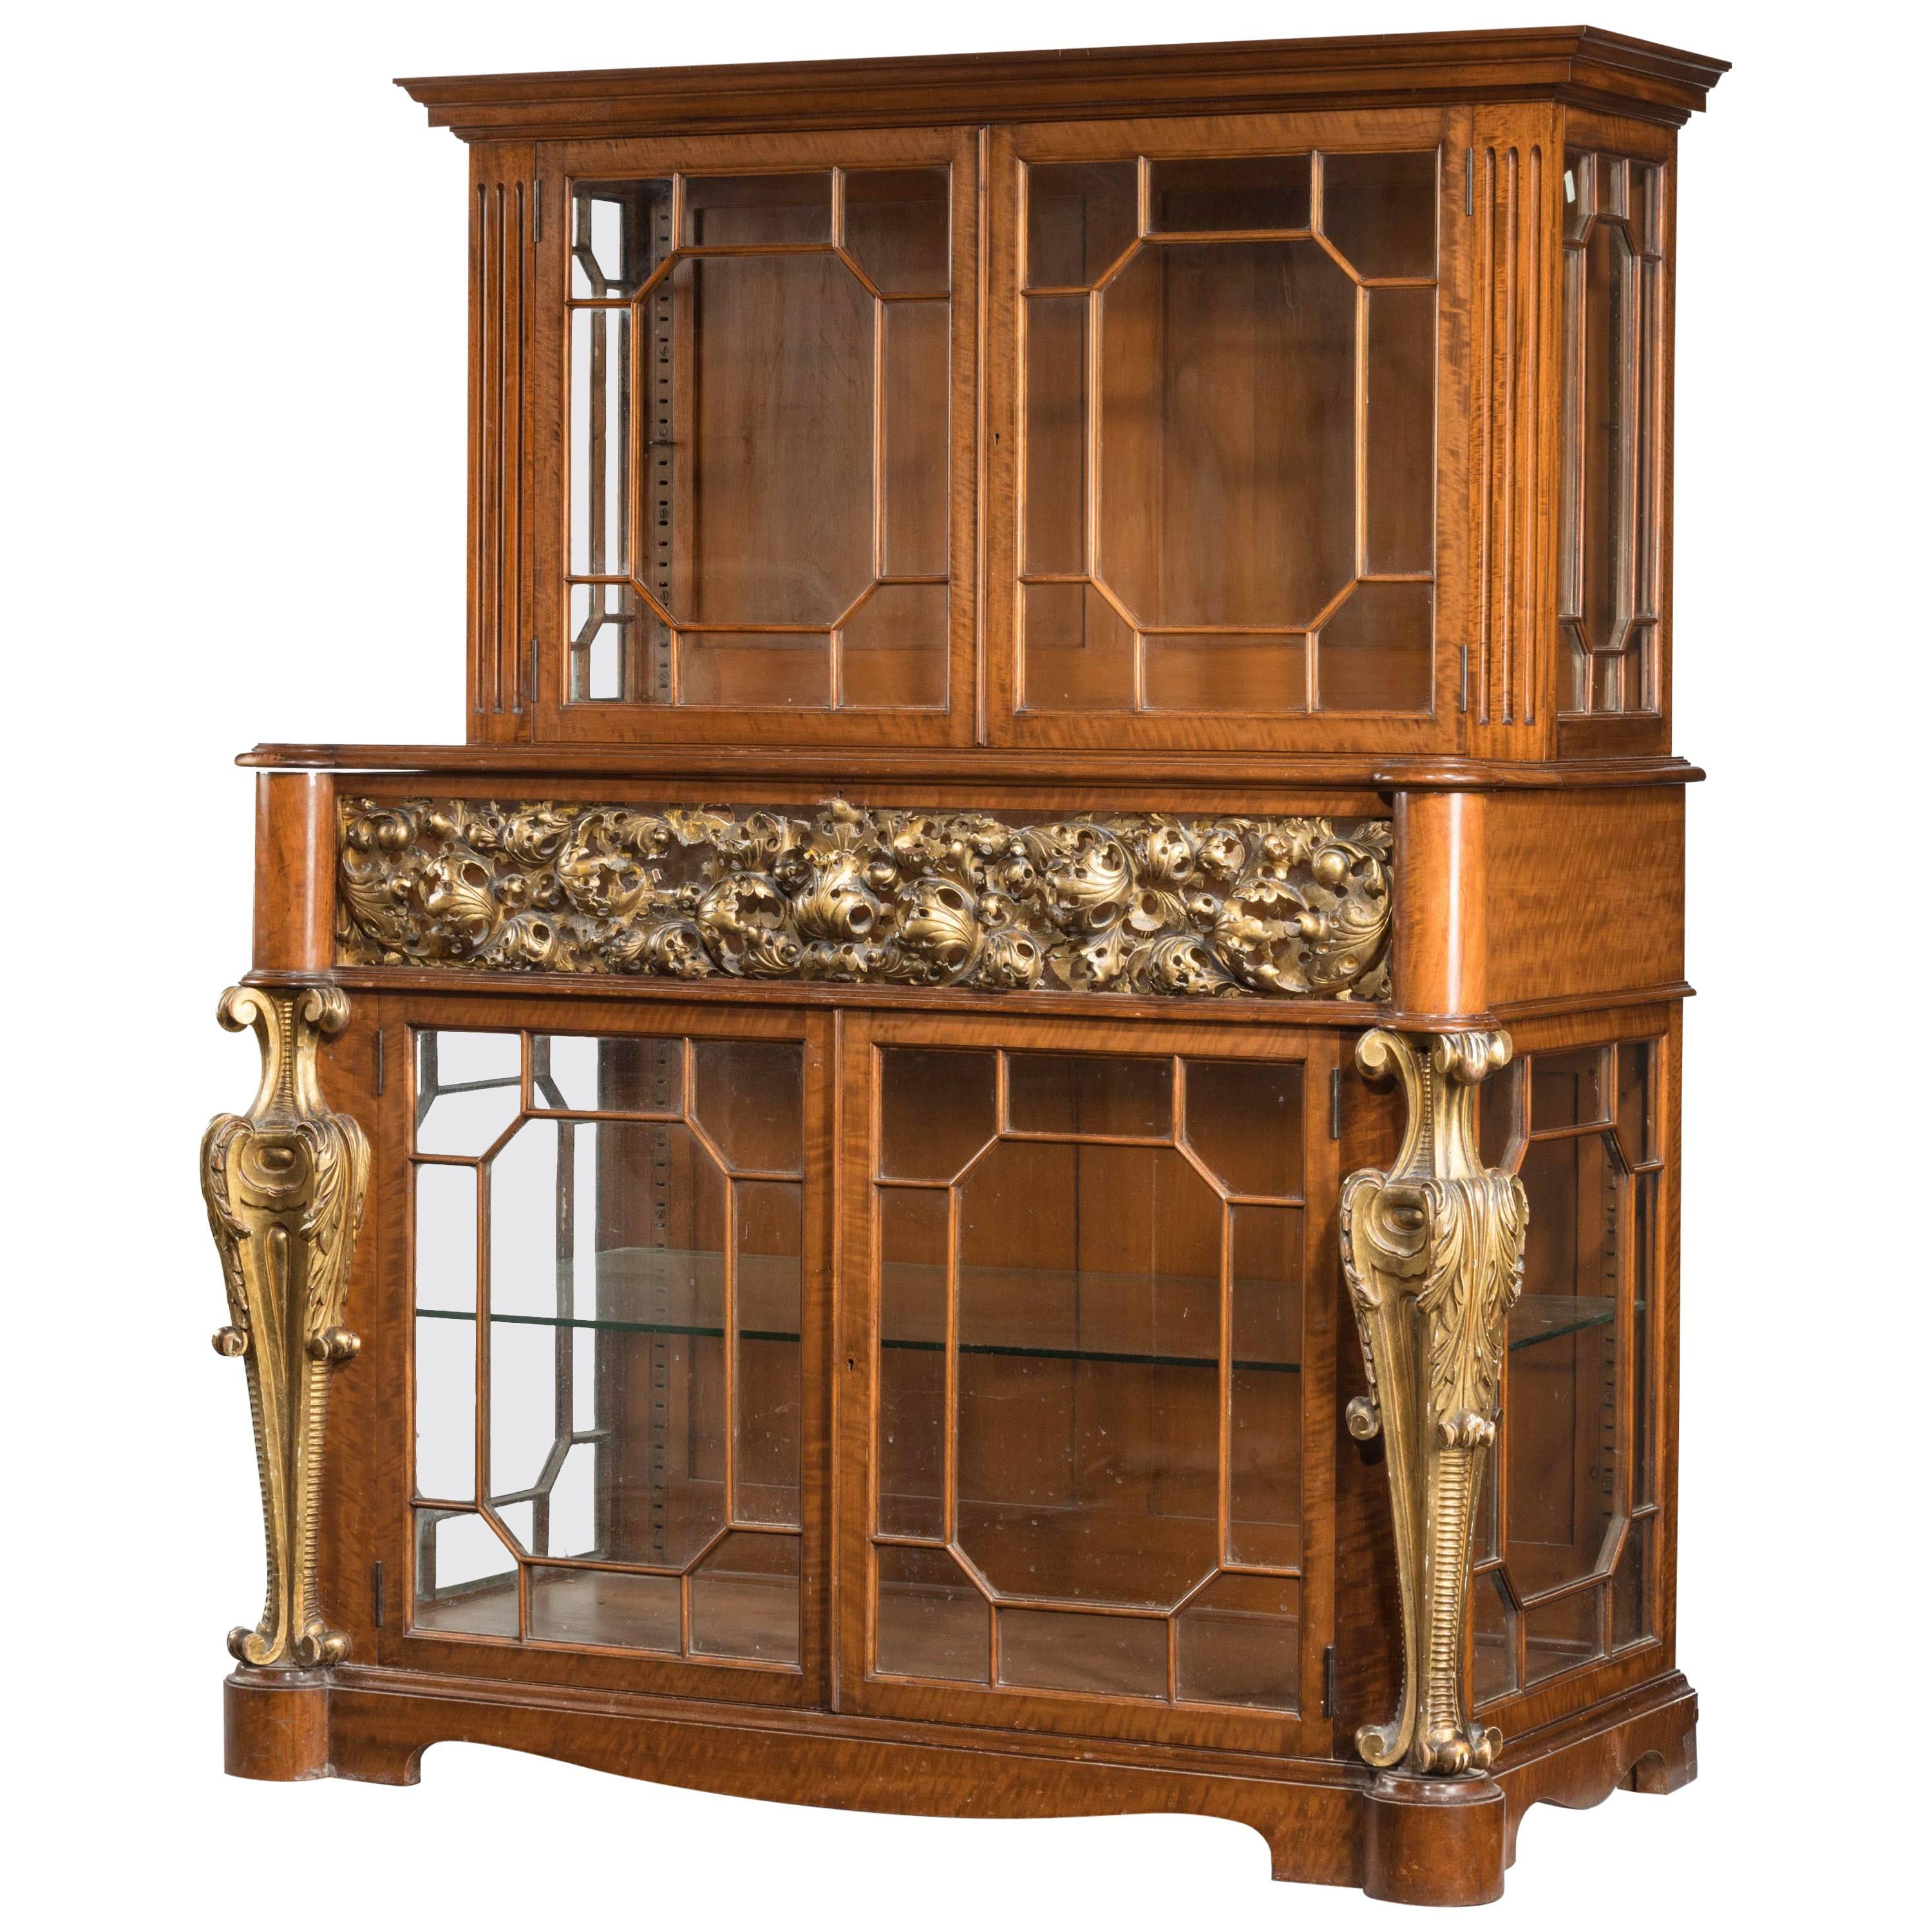 Mid-19th Century Satinwood Cabinet with Elaborate Giltwood Decoration